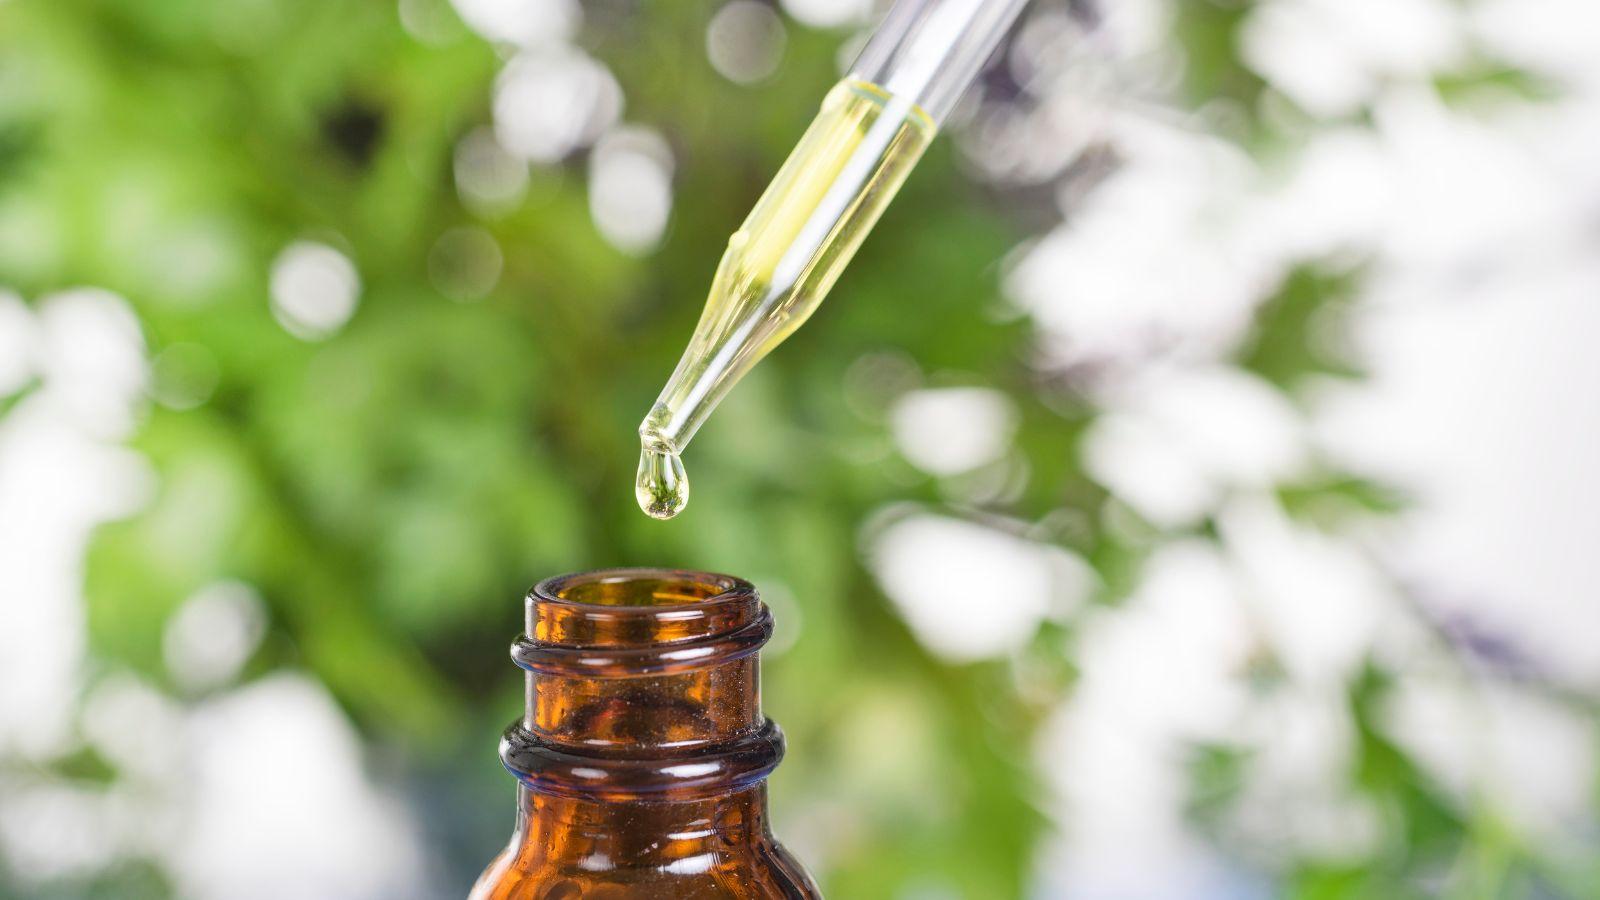 essential oils to aid sleep vetiver. Image of a dropper bottle and vial of essential oil on a plant based background